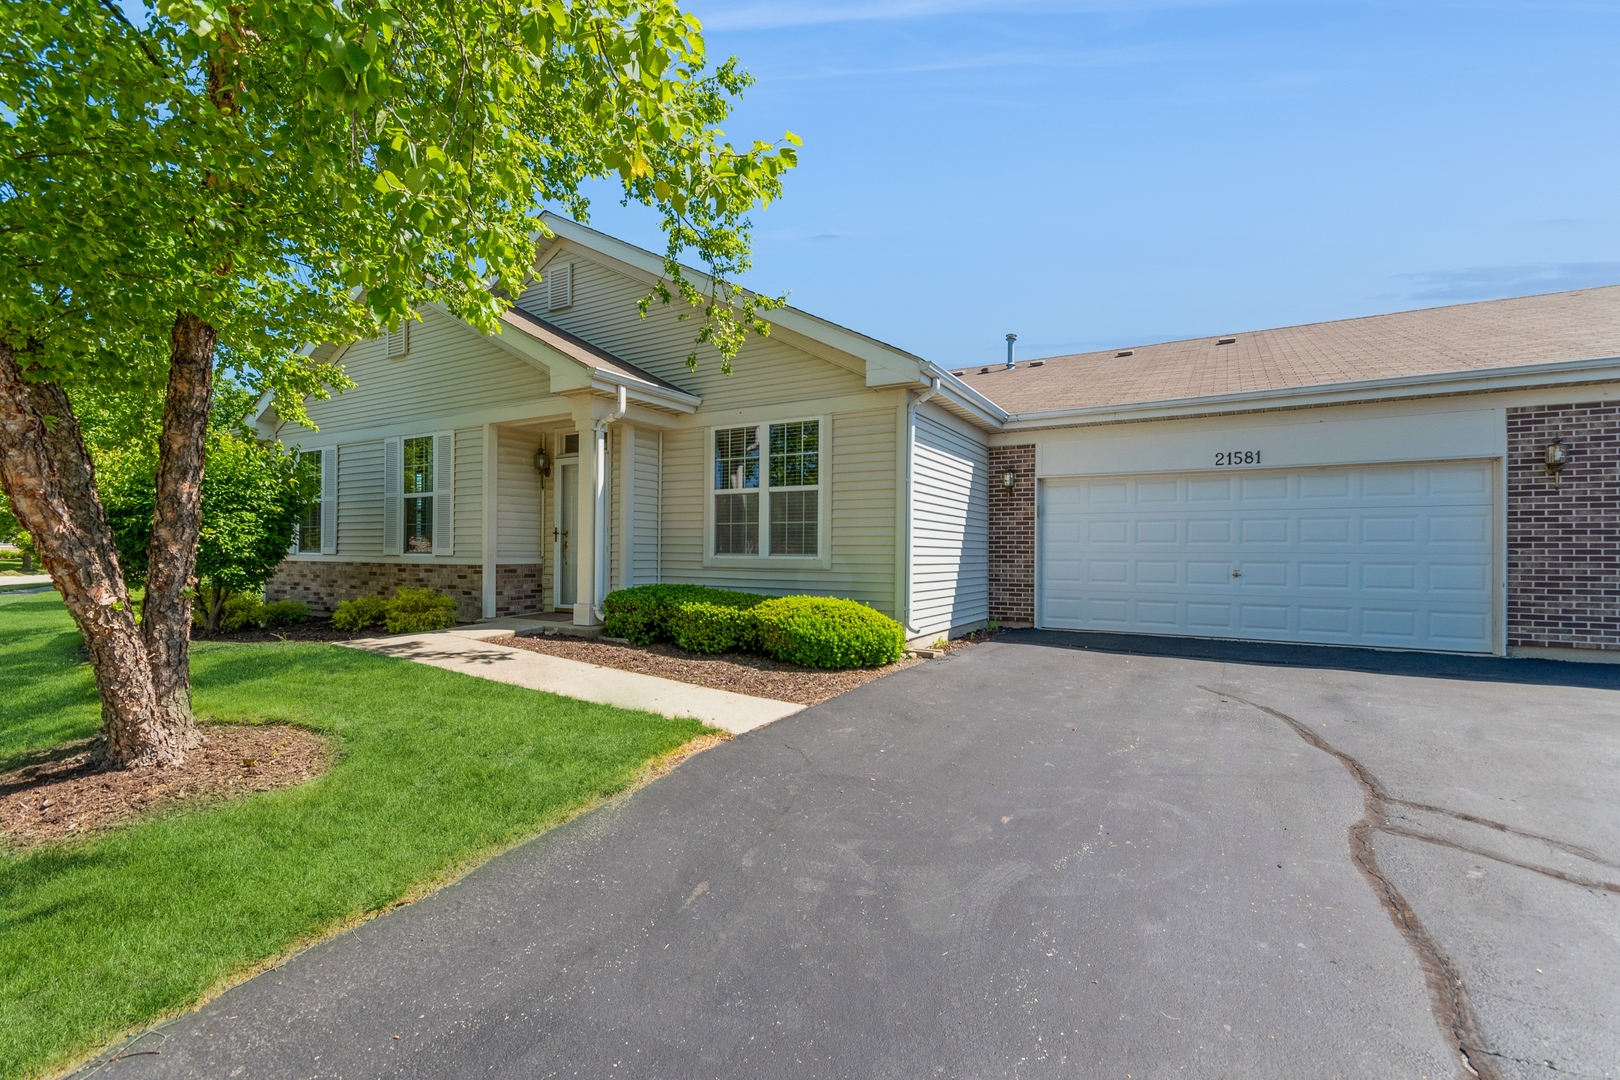 View Crest Hill, IL 60403 townhome